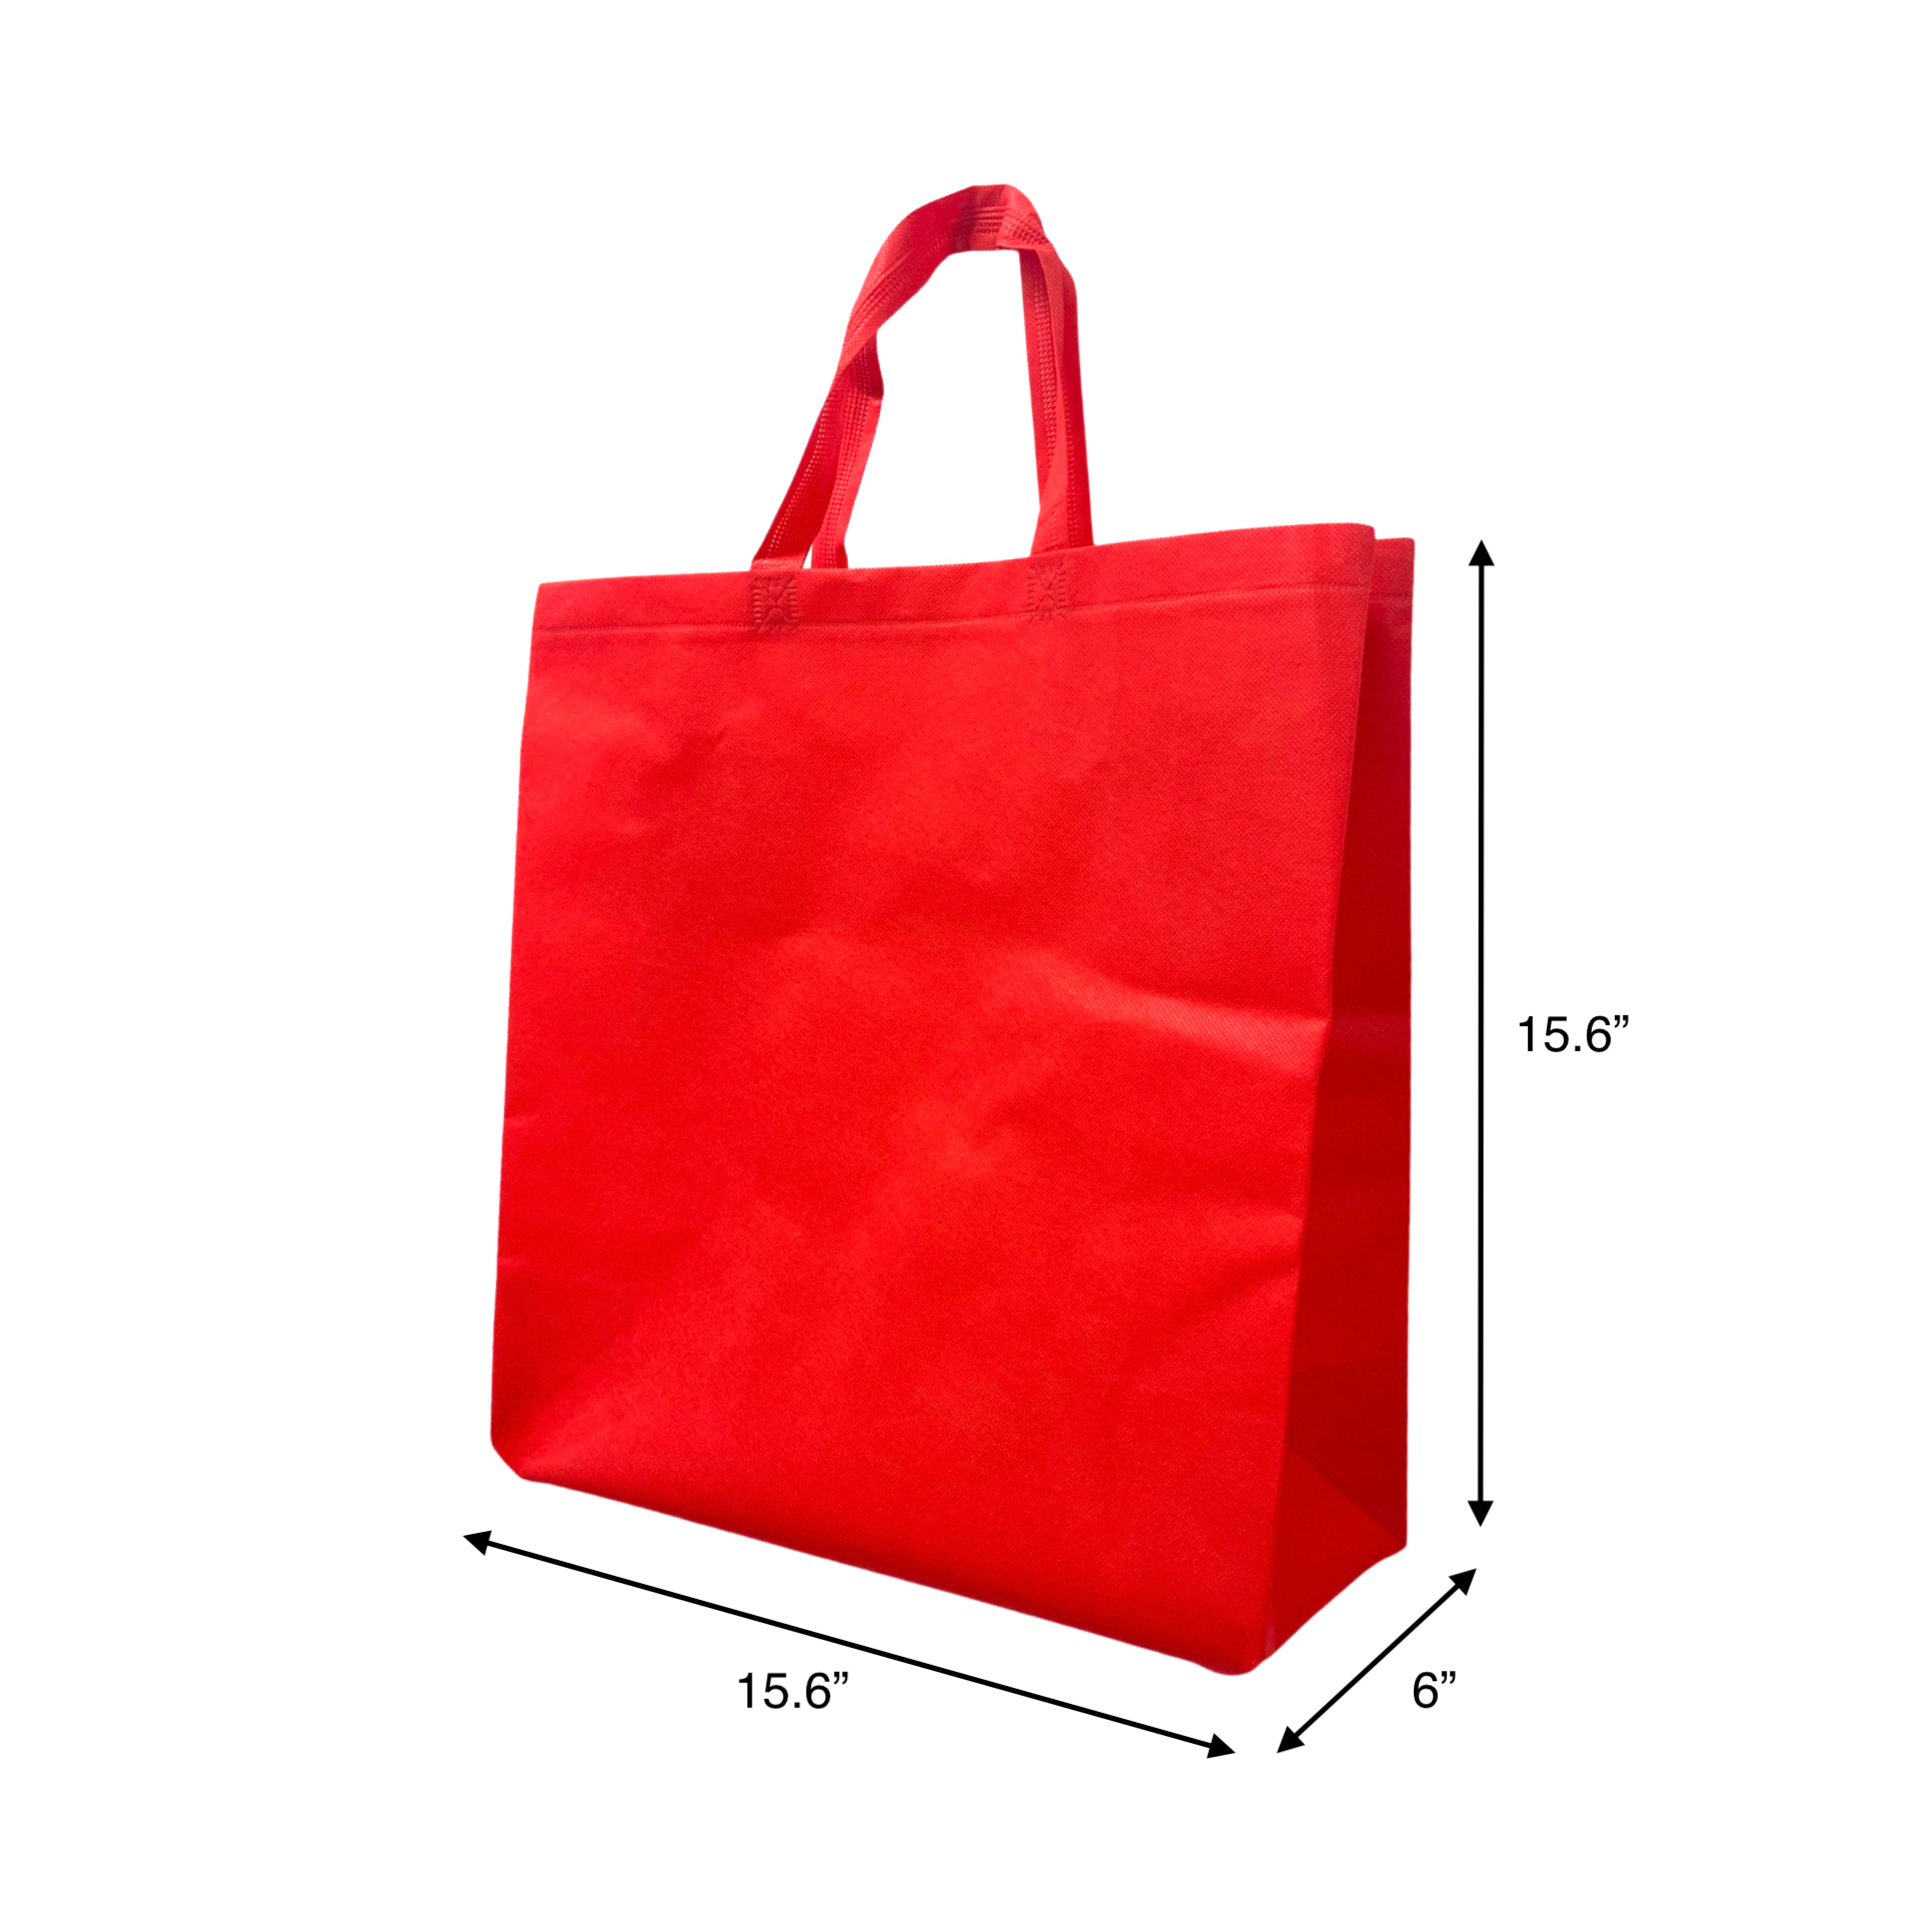 200pcs, Grocer, 15.5x6x15.5 inches, Red Non-Woven Reusable Shopping Bags, with Flat Handles